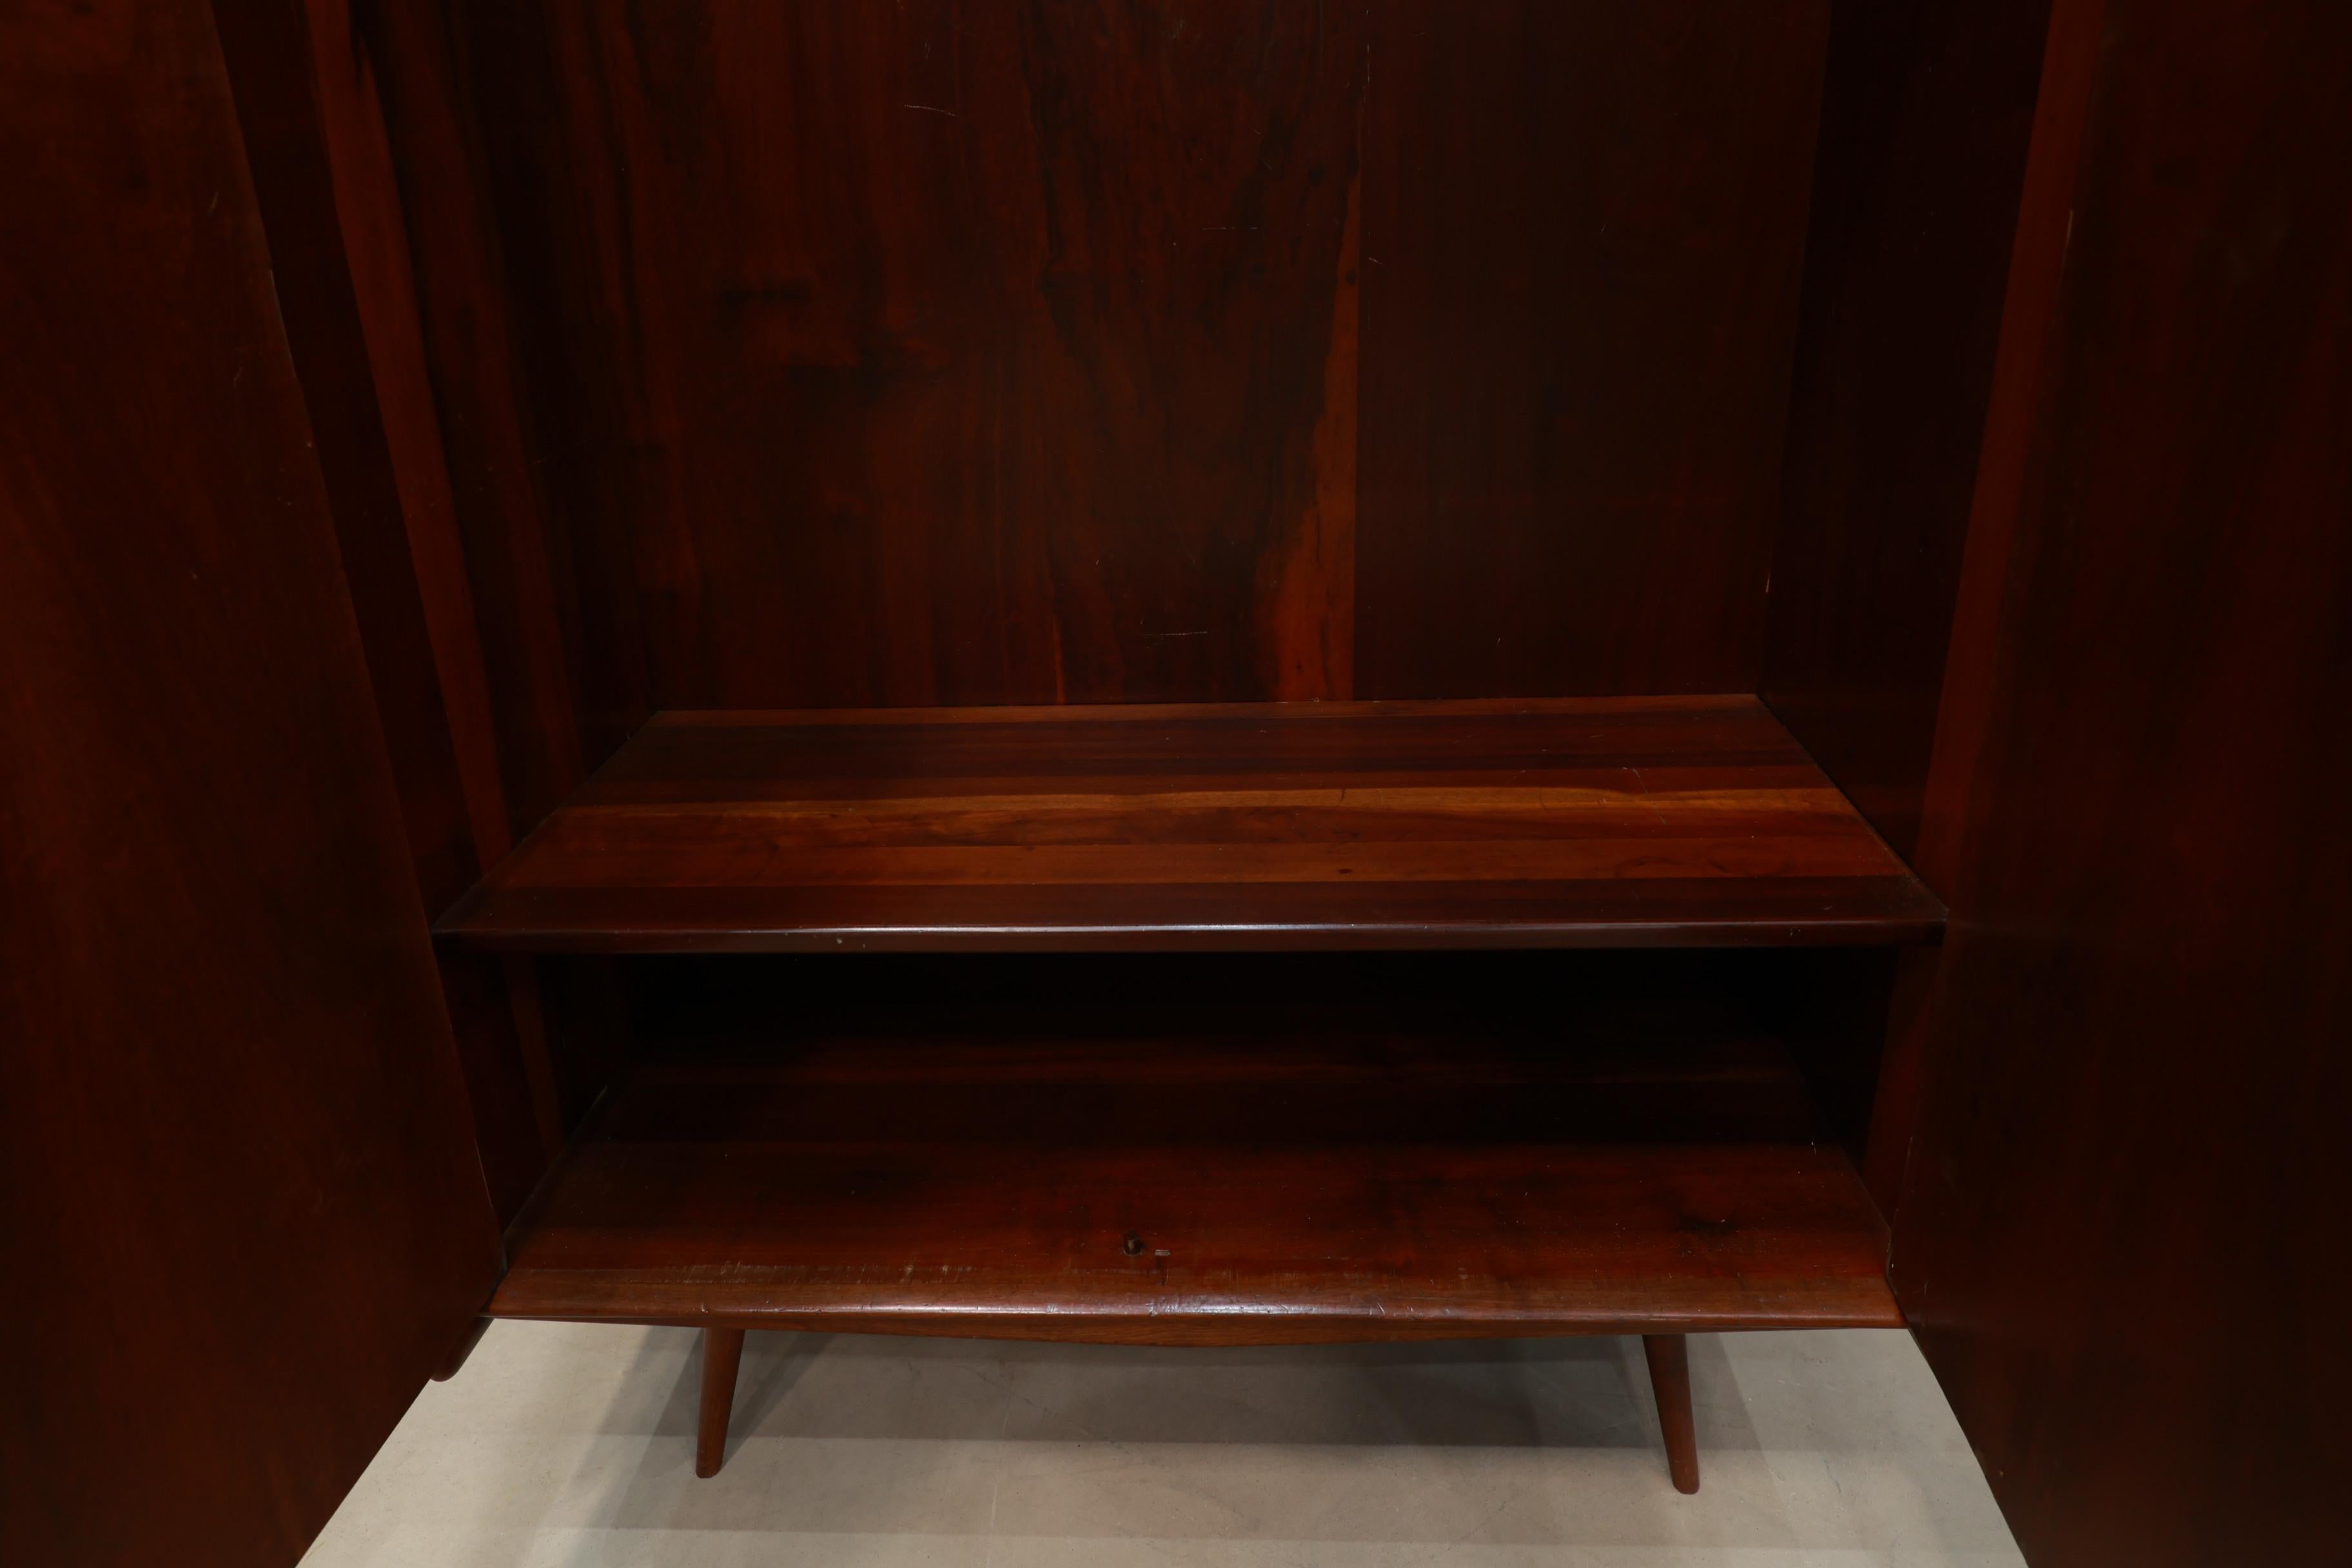 20th Century Brazilian Modern Armoire in Hardwood by Moveis Cimo, 1950s, Brazil For Sale